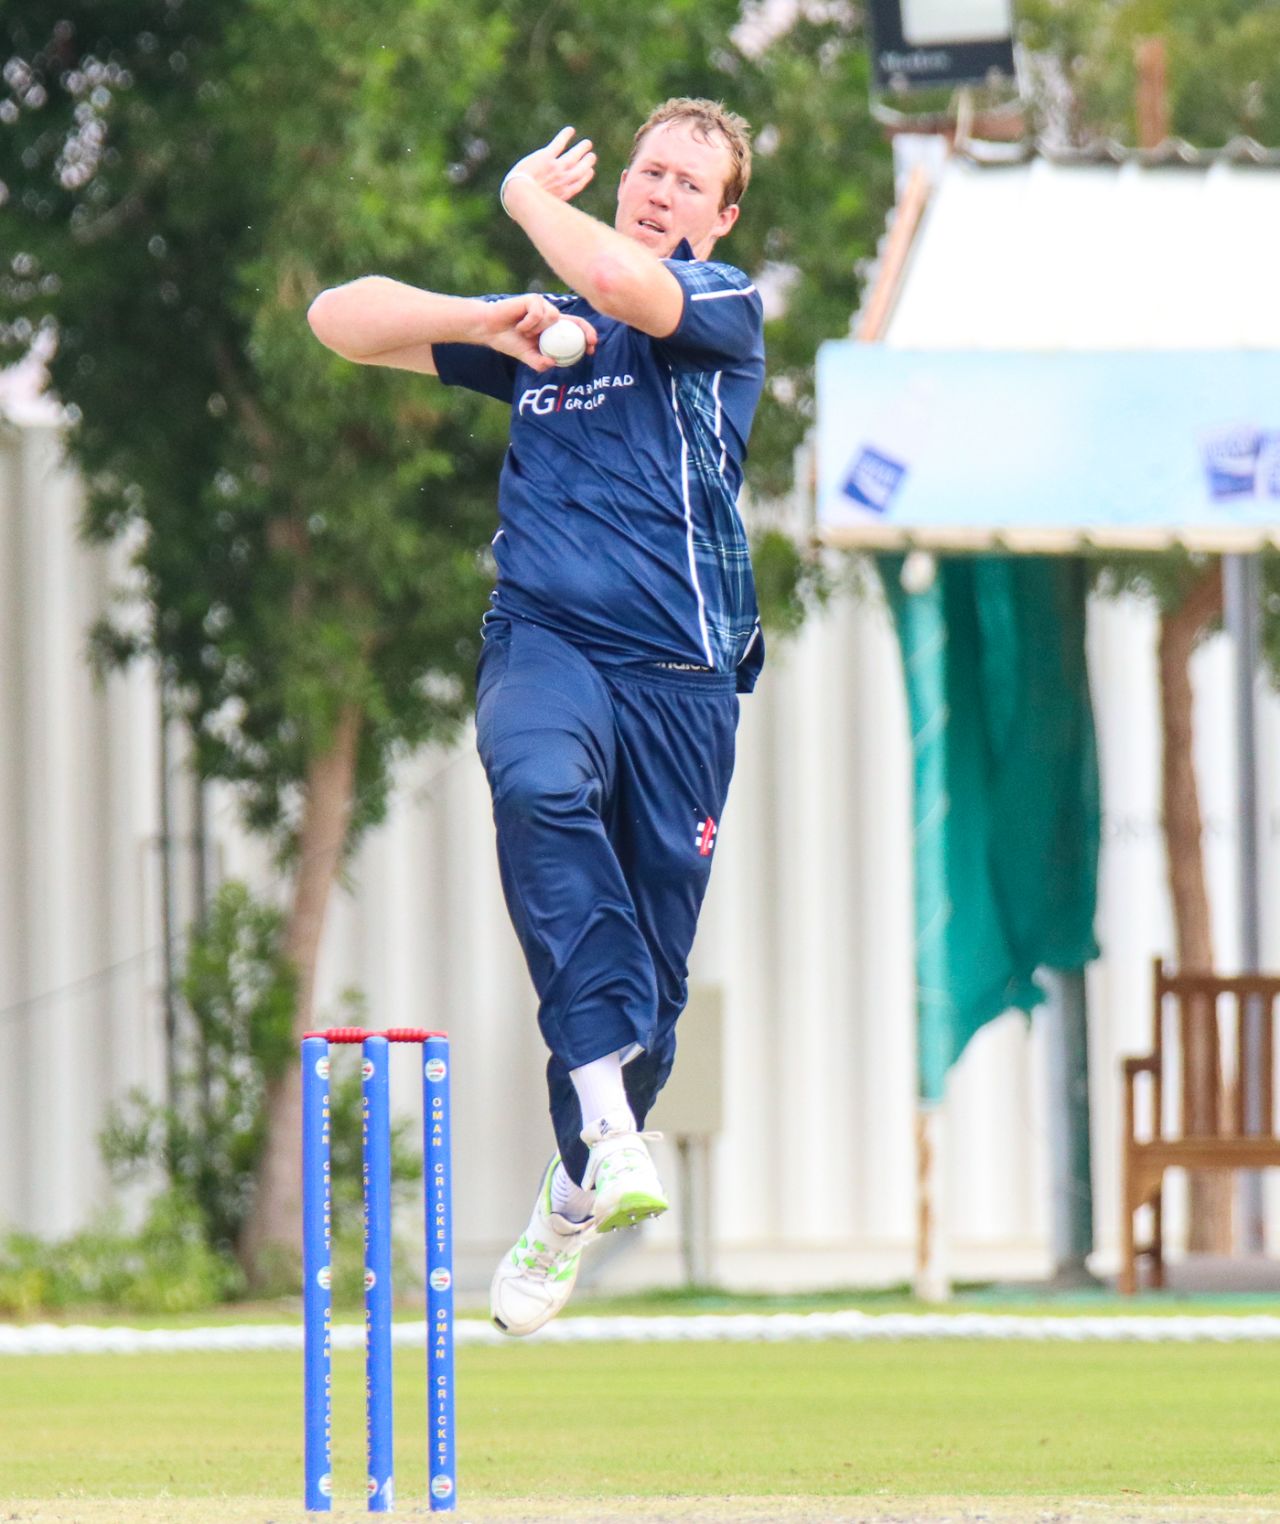 At 6'9", Adrian Neill is an imposing figure as he leaps into his delivery stride, Oman v Scotland, Al Amerat, February 19, 2019